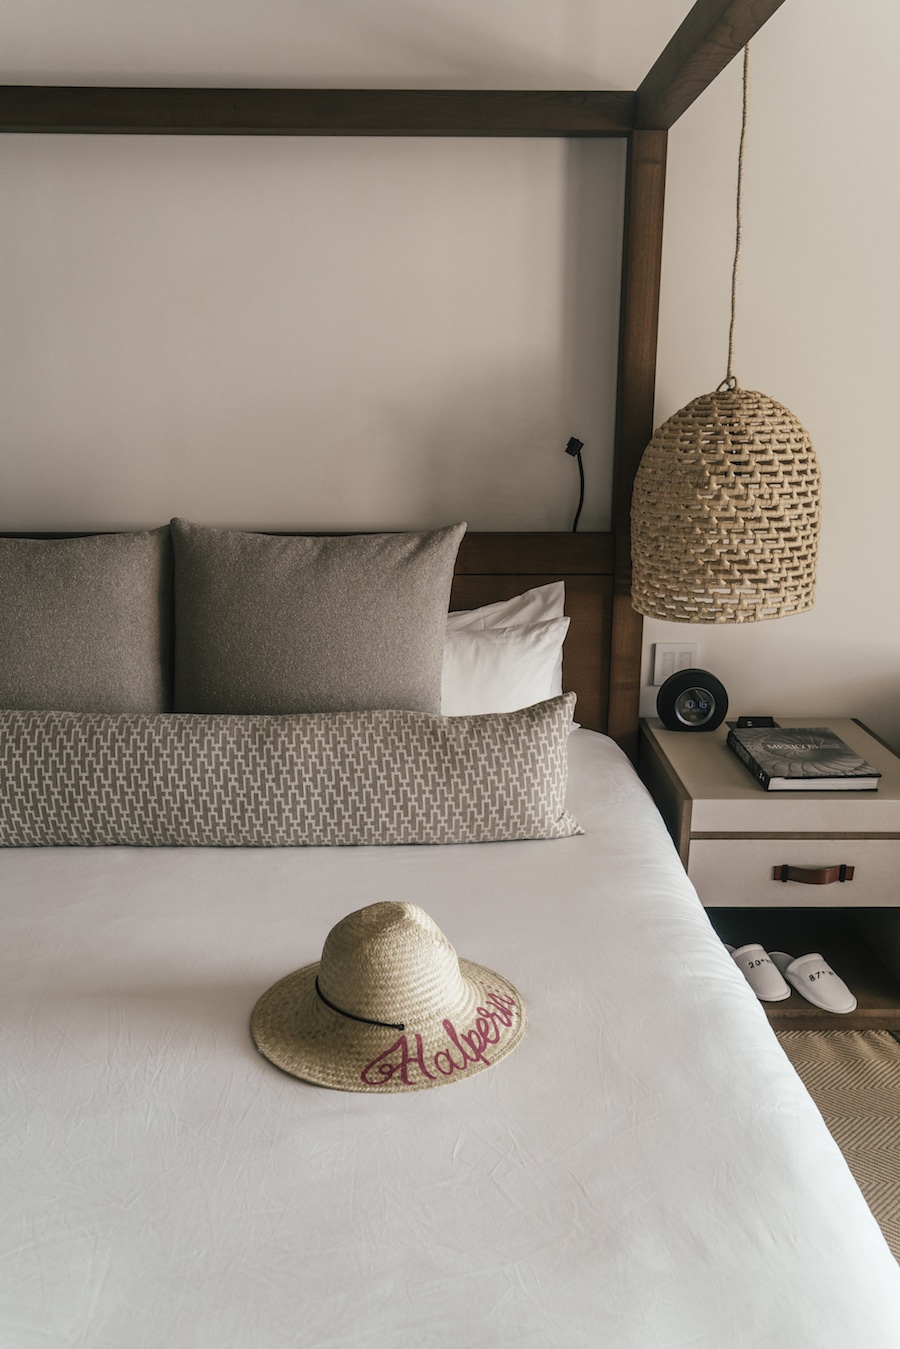 How Riviera Maya's Unico 20°87° Hotel is Completely Redefining the Term 